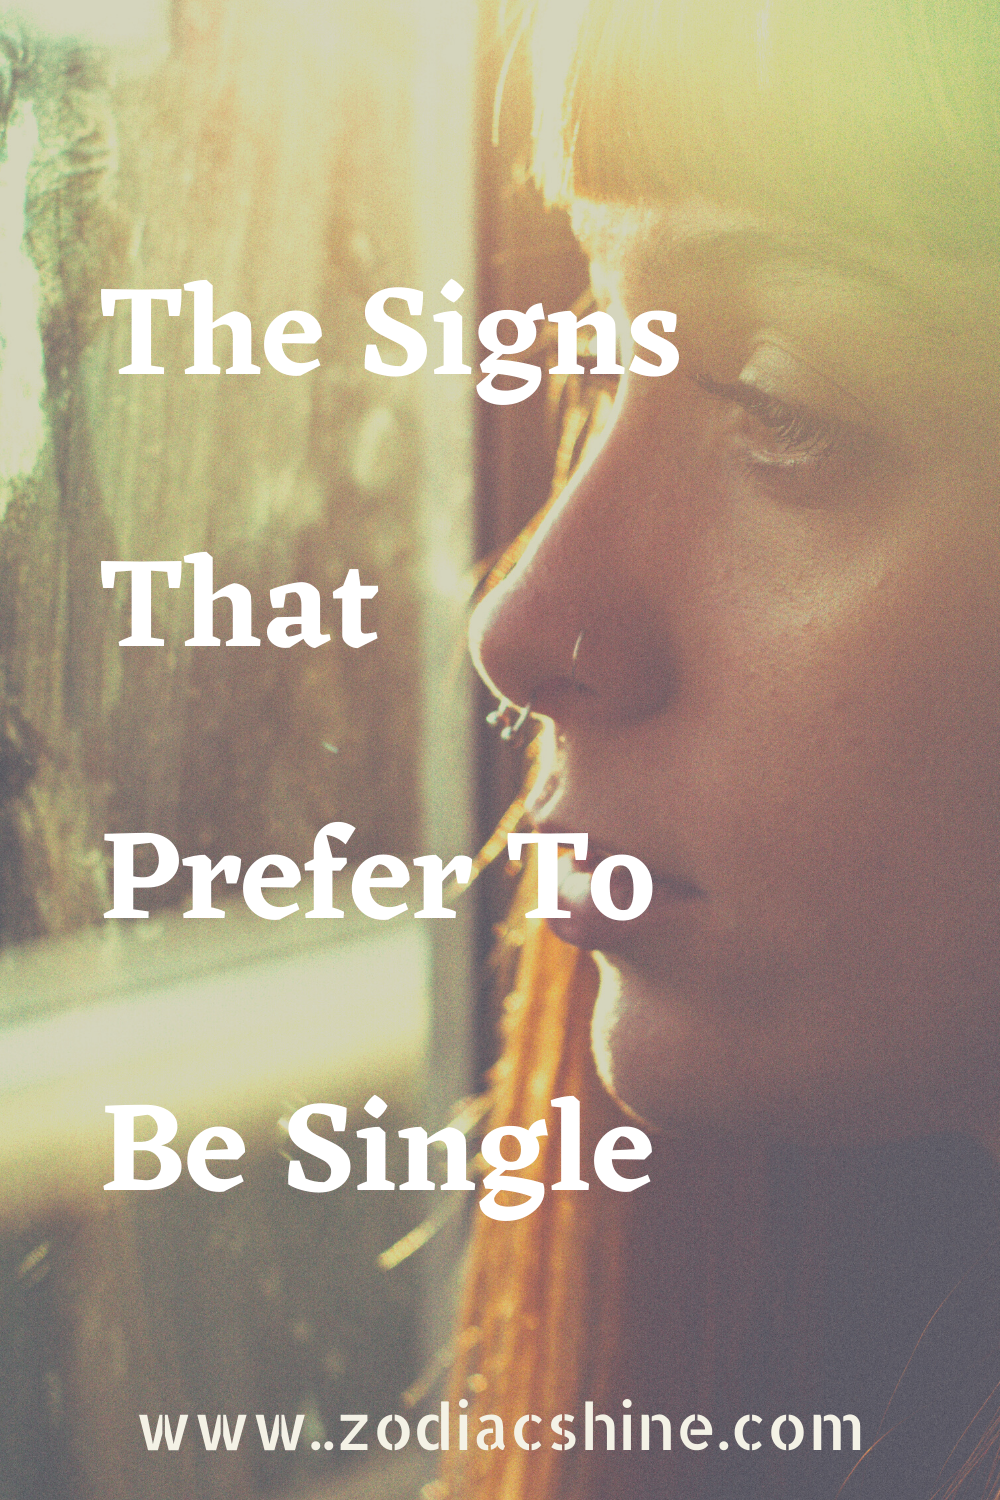 The Signs That Prefer To Be Single